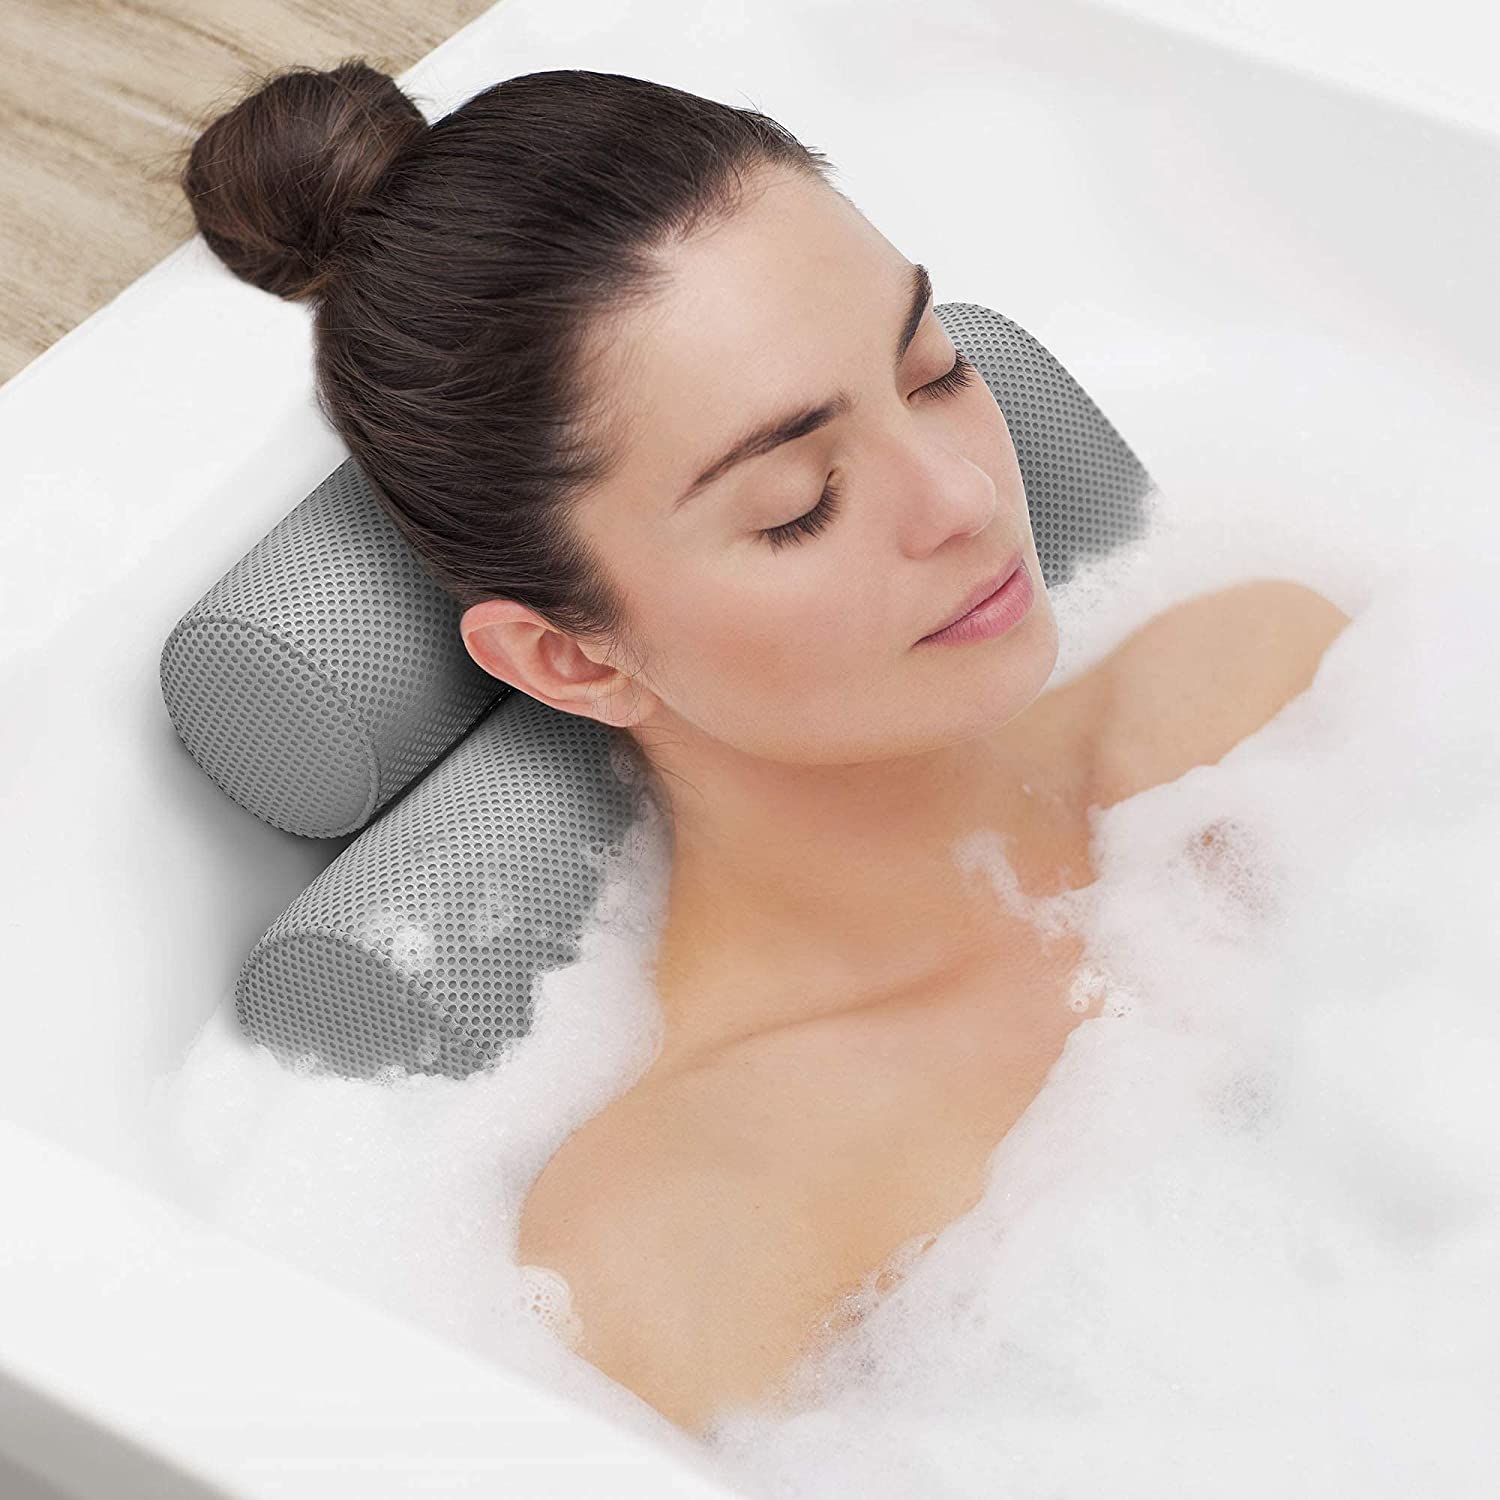 What You Ought To Have Known Before Purchasing a Bathtub Cushion